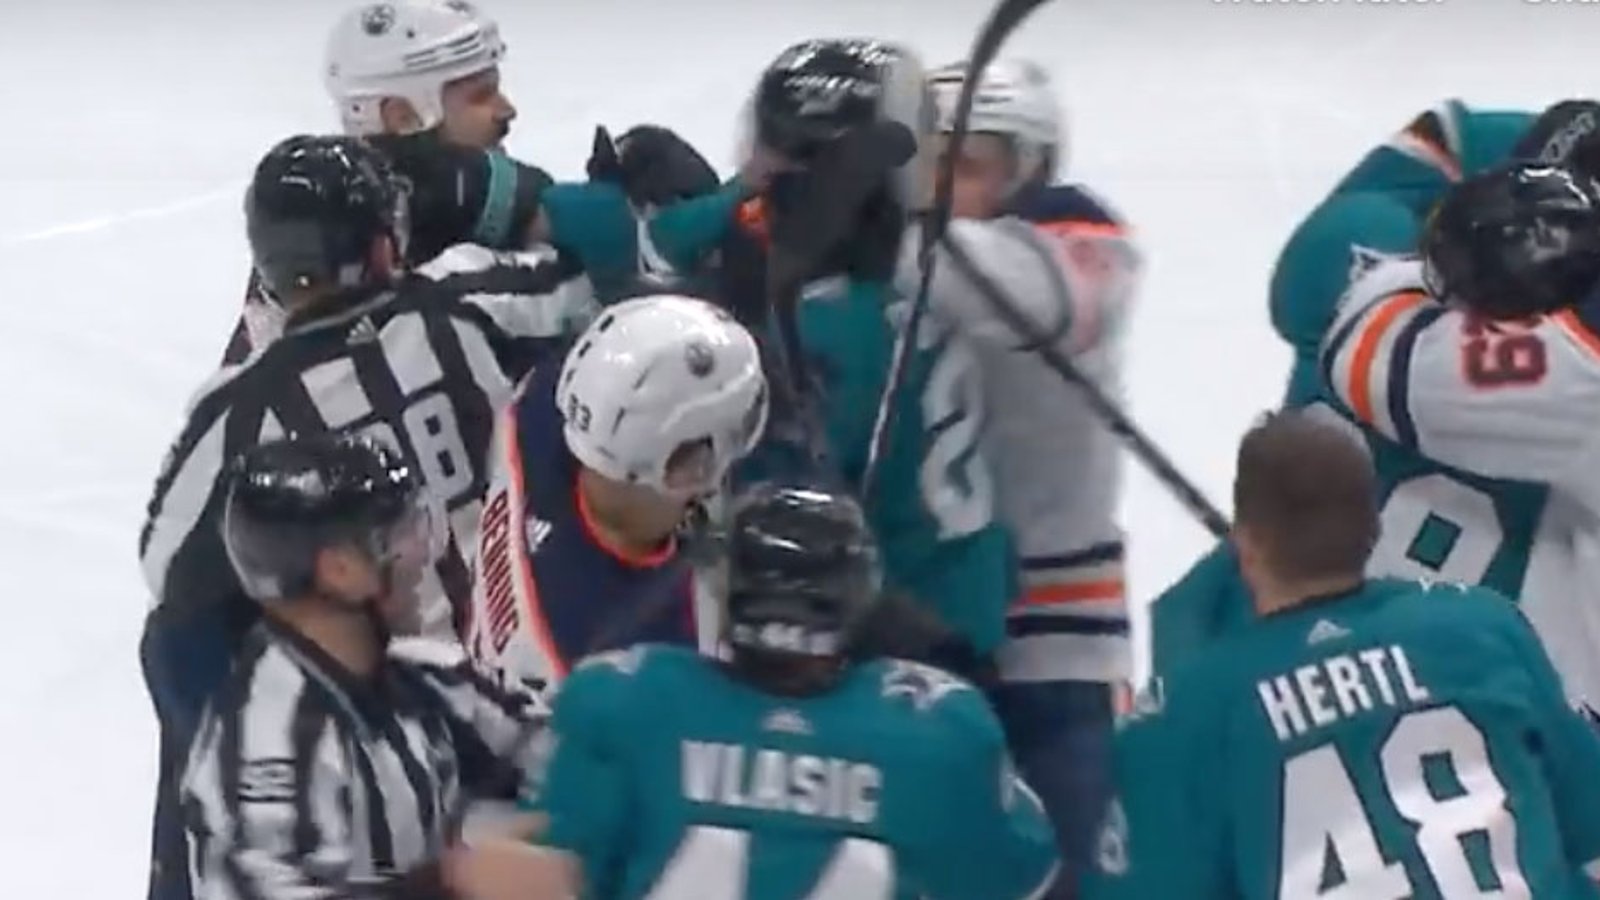 Huge brawl ensues after Connor McDavid gets dropped in neutral zone!